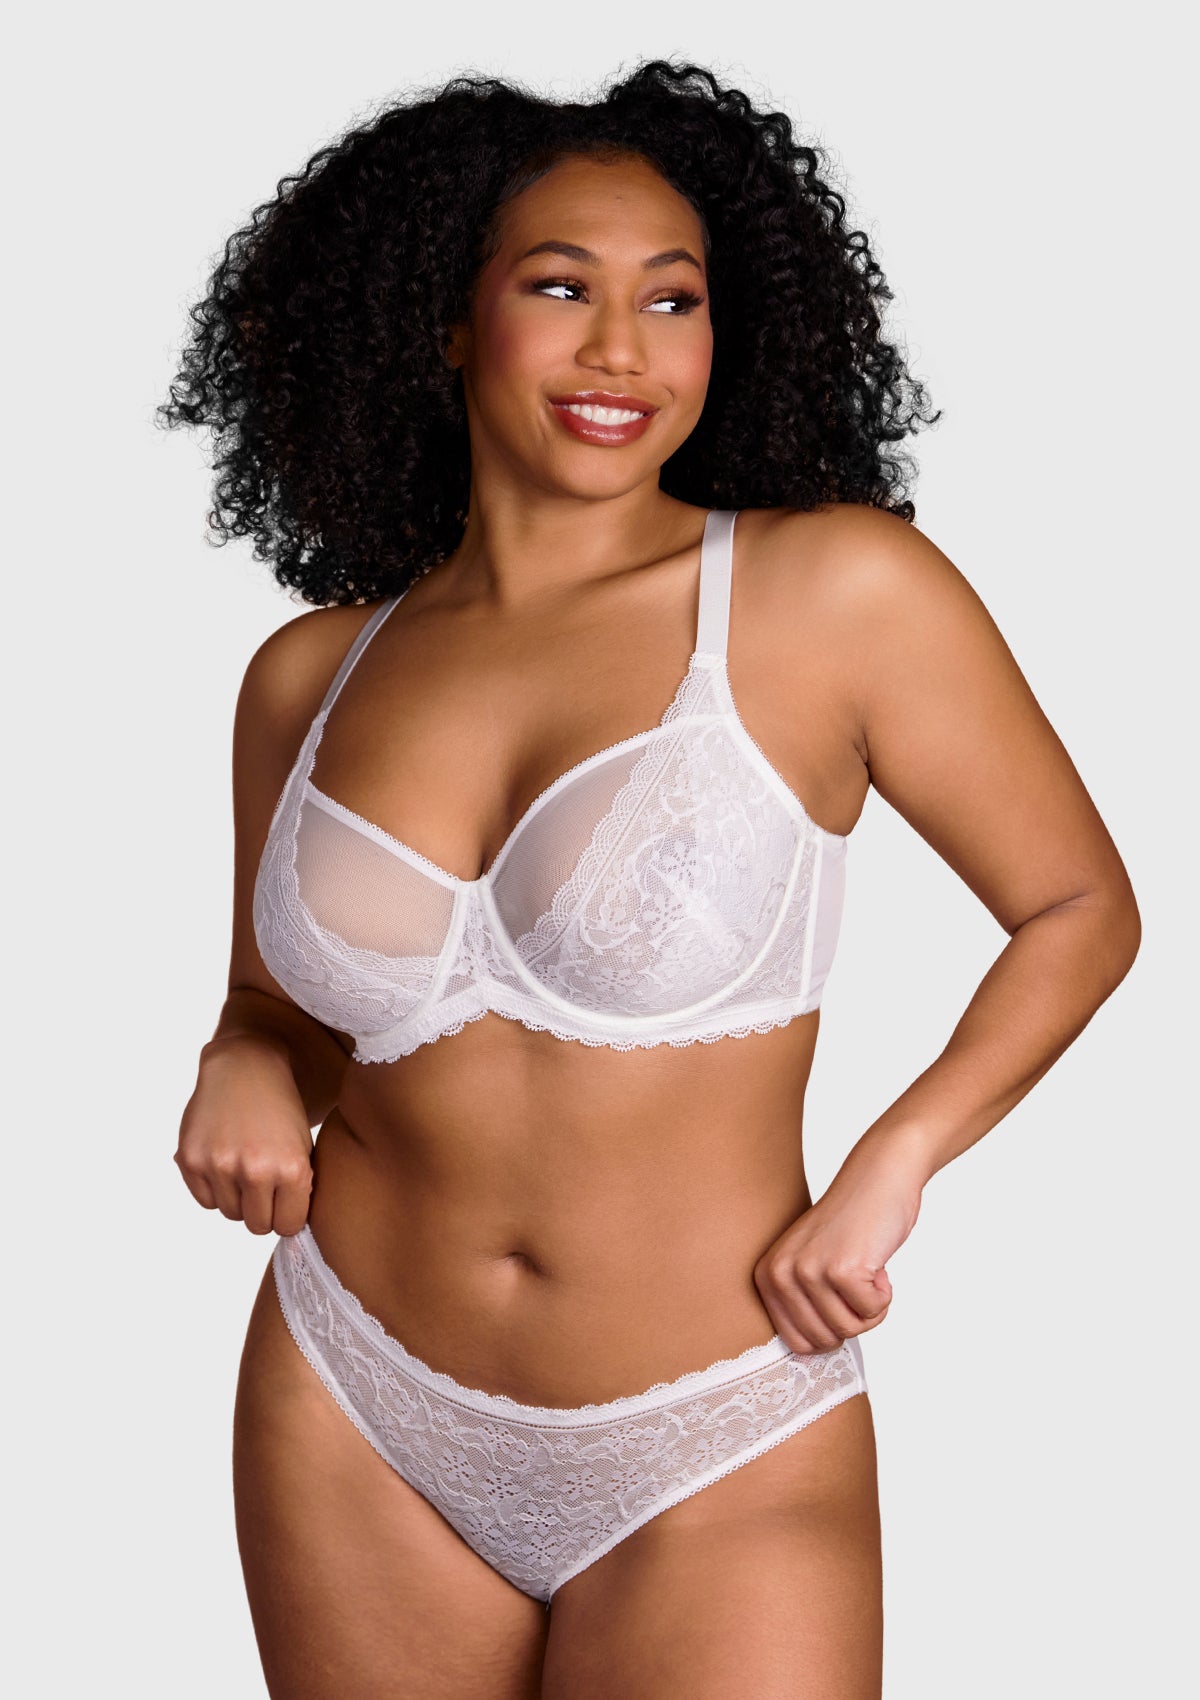 HSIA Anemone Big Bra: Best Bra For Lift And Support, Floral Bra - Light Blue / 34 / DDD/F